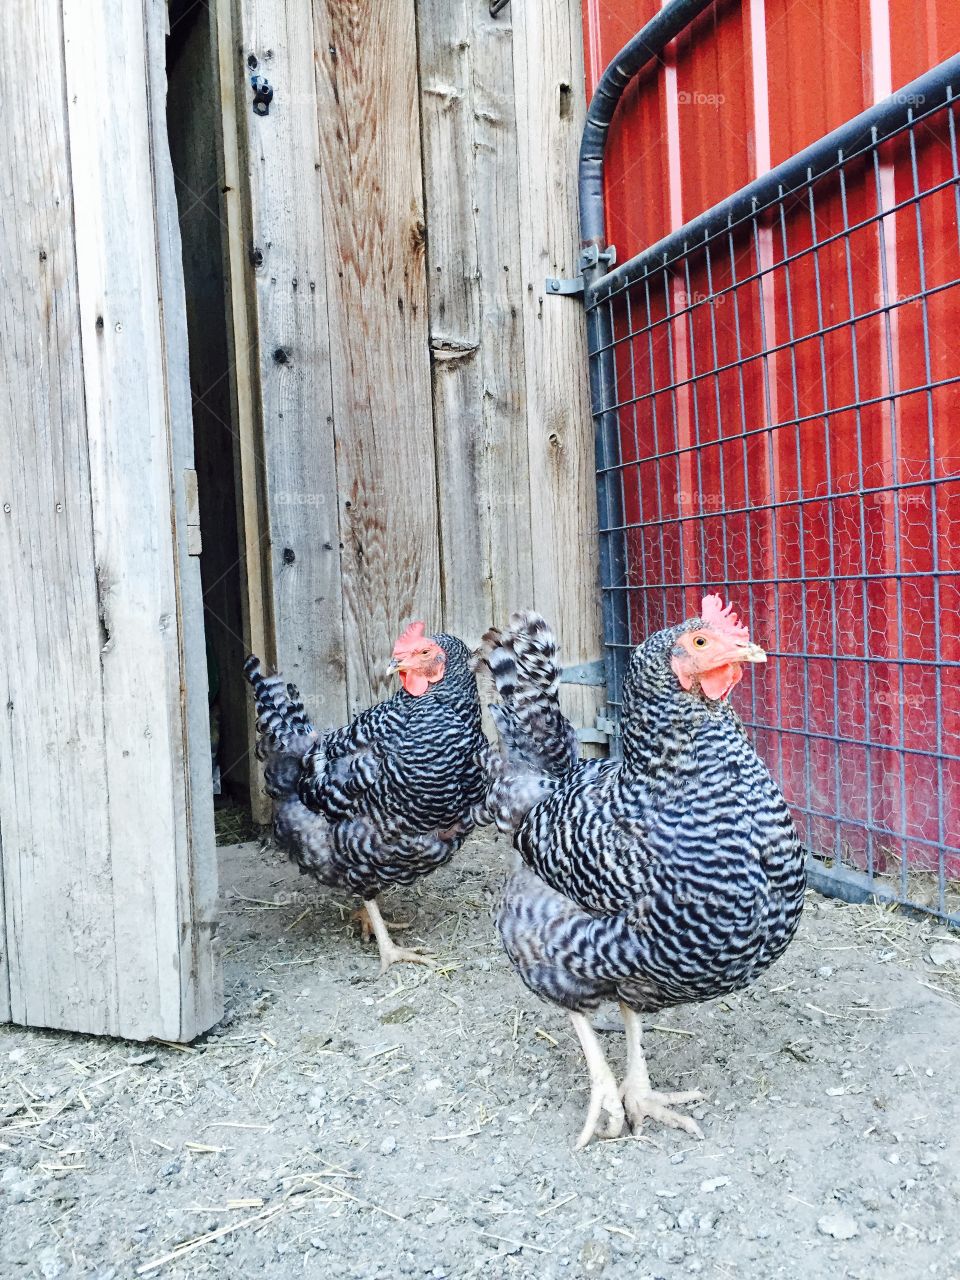 Two Chickens by Barn. Two barred rock hens in a barnyard by a red barn door